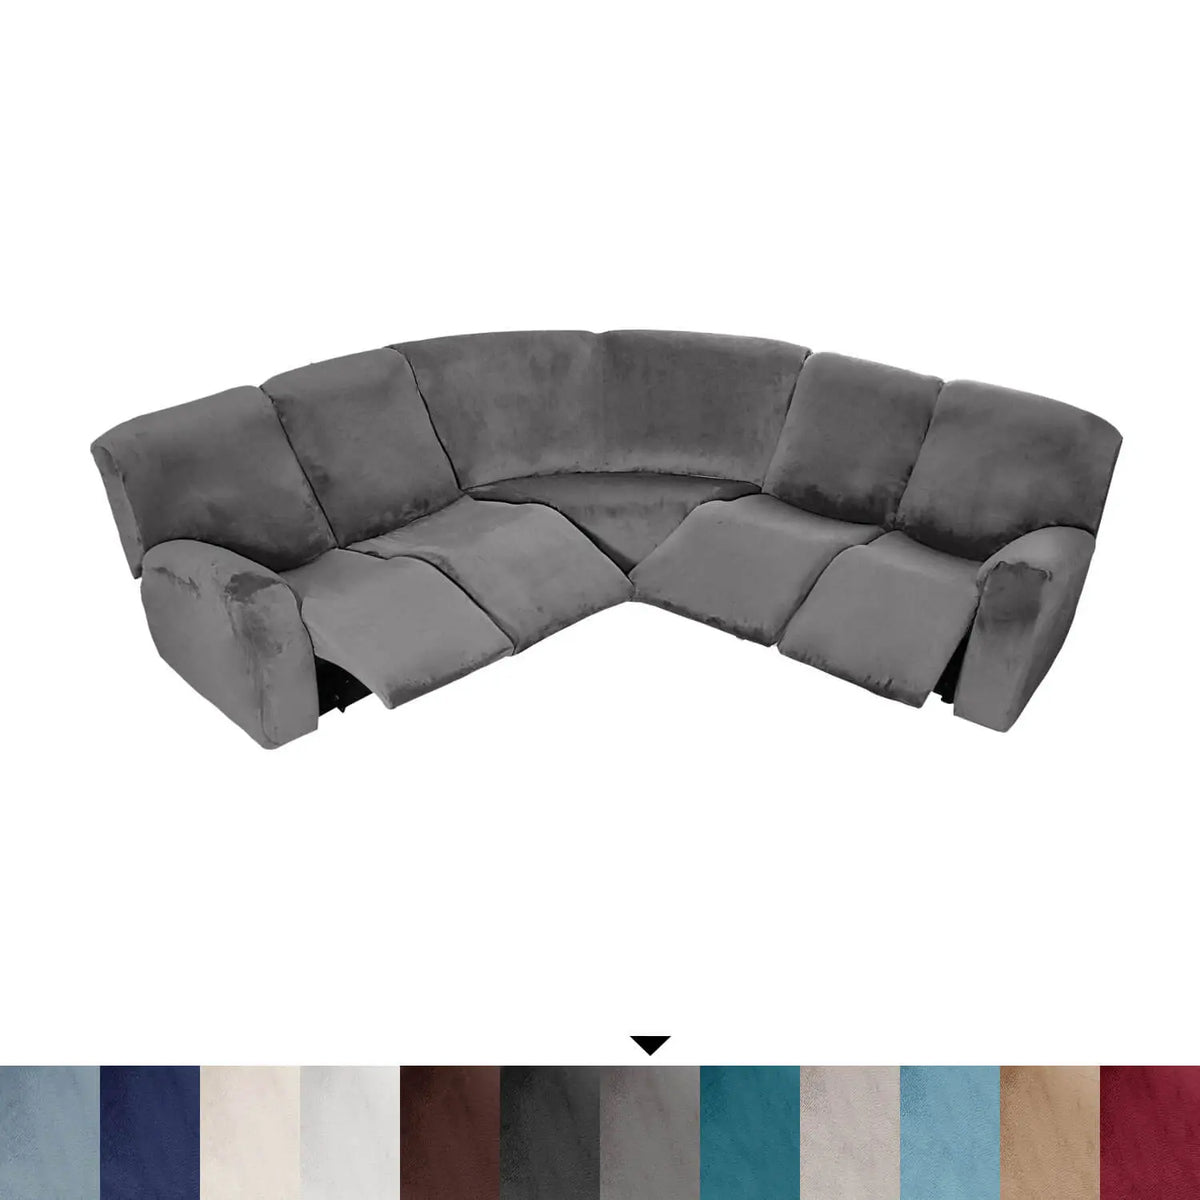 Crfatop 5-seater L Shape Sofa Cover with Recliner Grey